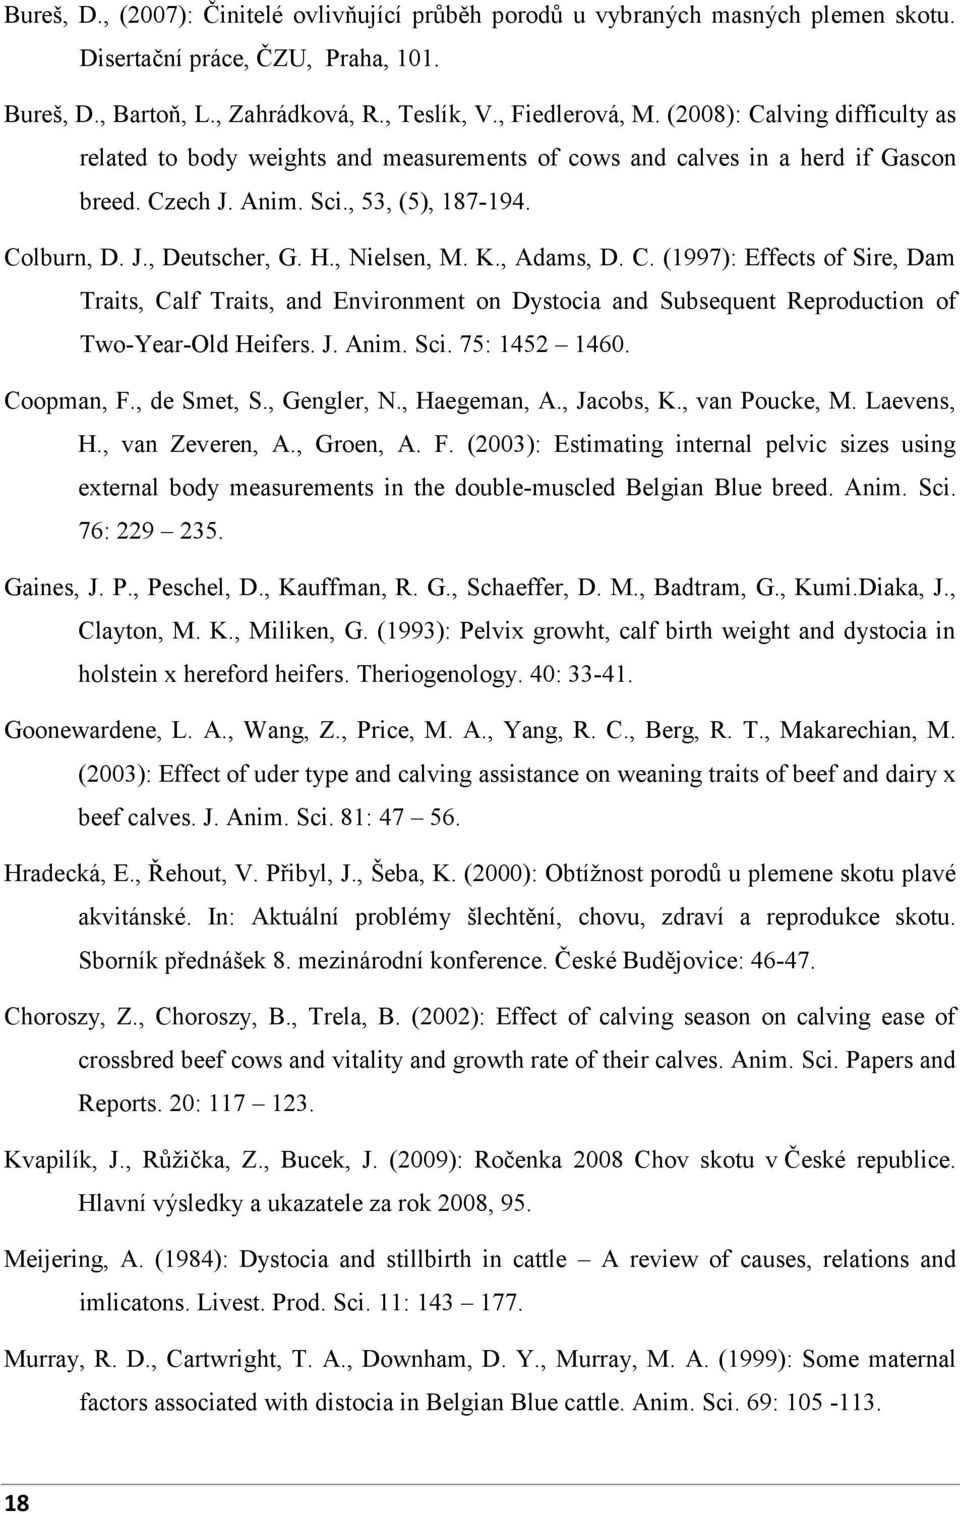 , Nielsen, M. K., Adams, D. C. (1997): Effects of Sire, Dam Traits, Calf Traits, and Environment on Dystocia and Subsequent Reproduction of Two-Year-Old Heifers. J. Anim. Sci. 75: 1452 1460.